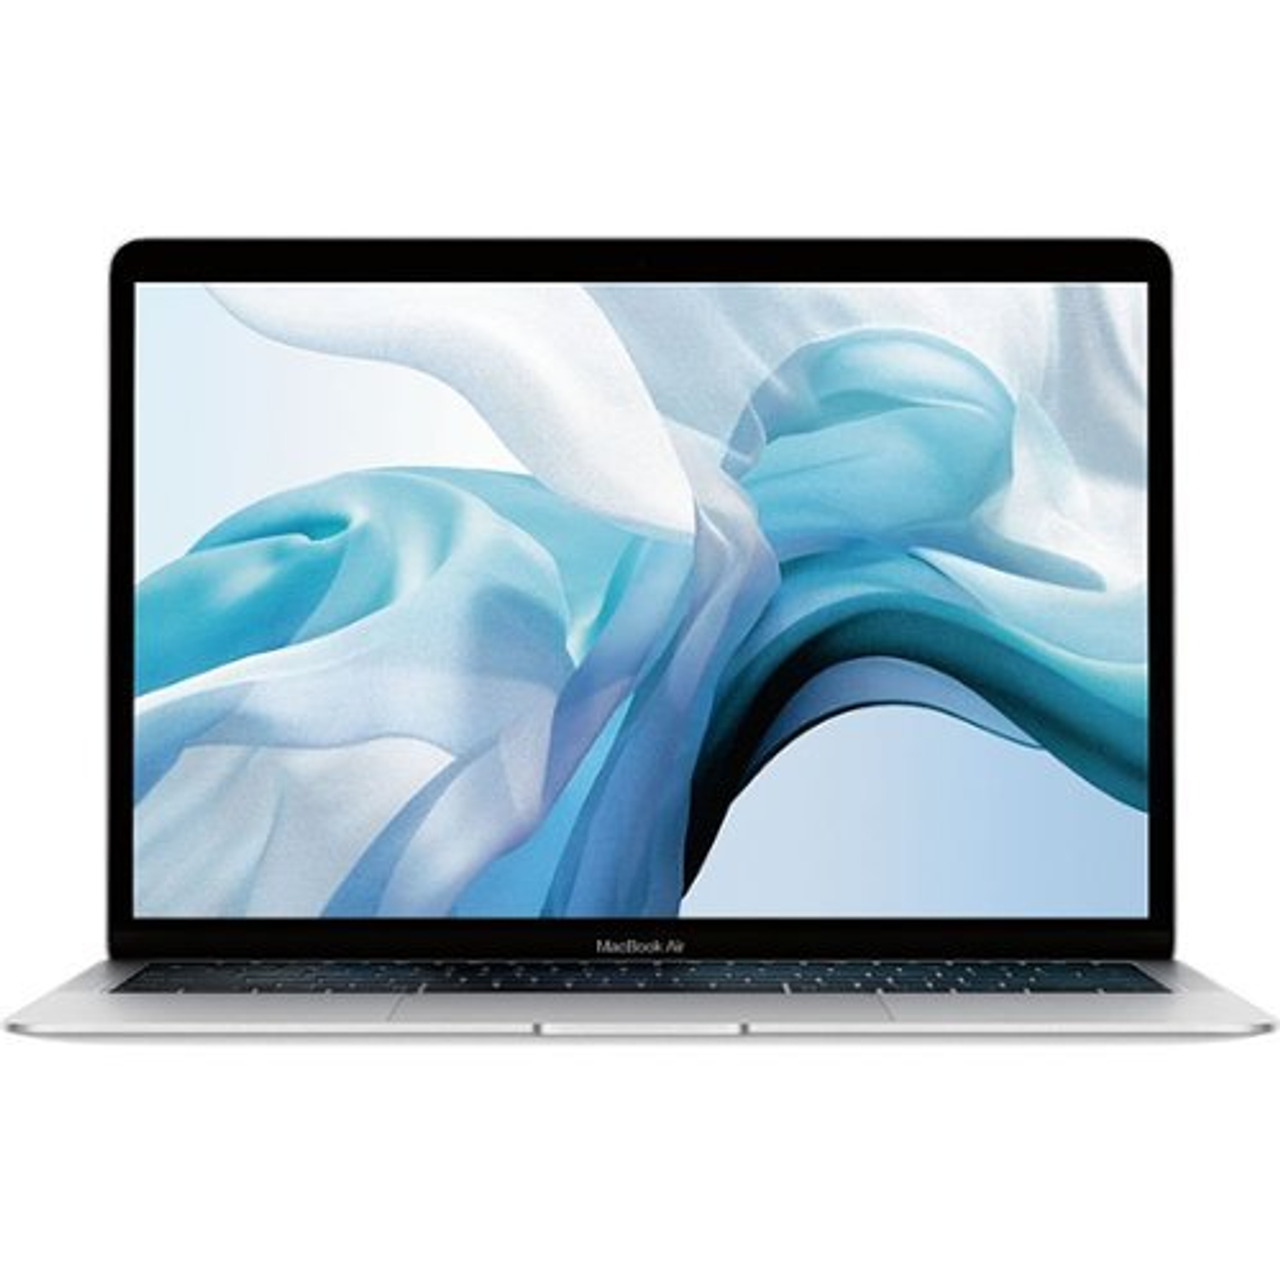 Apple MacBook Air 13" (2018) Pre-Owned Refurbished Intel Core i5 1.6GHz with 8GB Memory - 256GB SSD